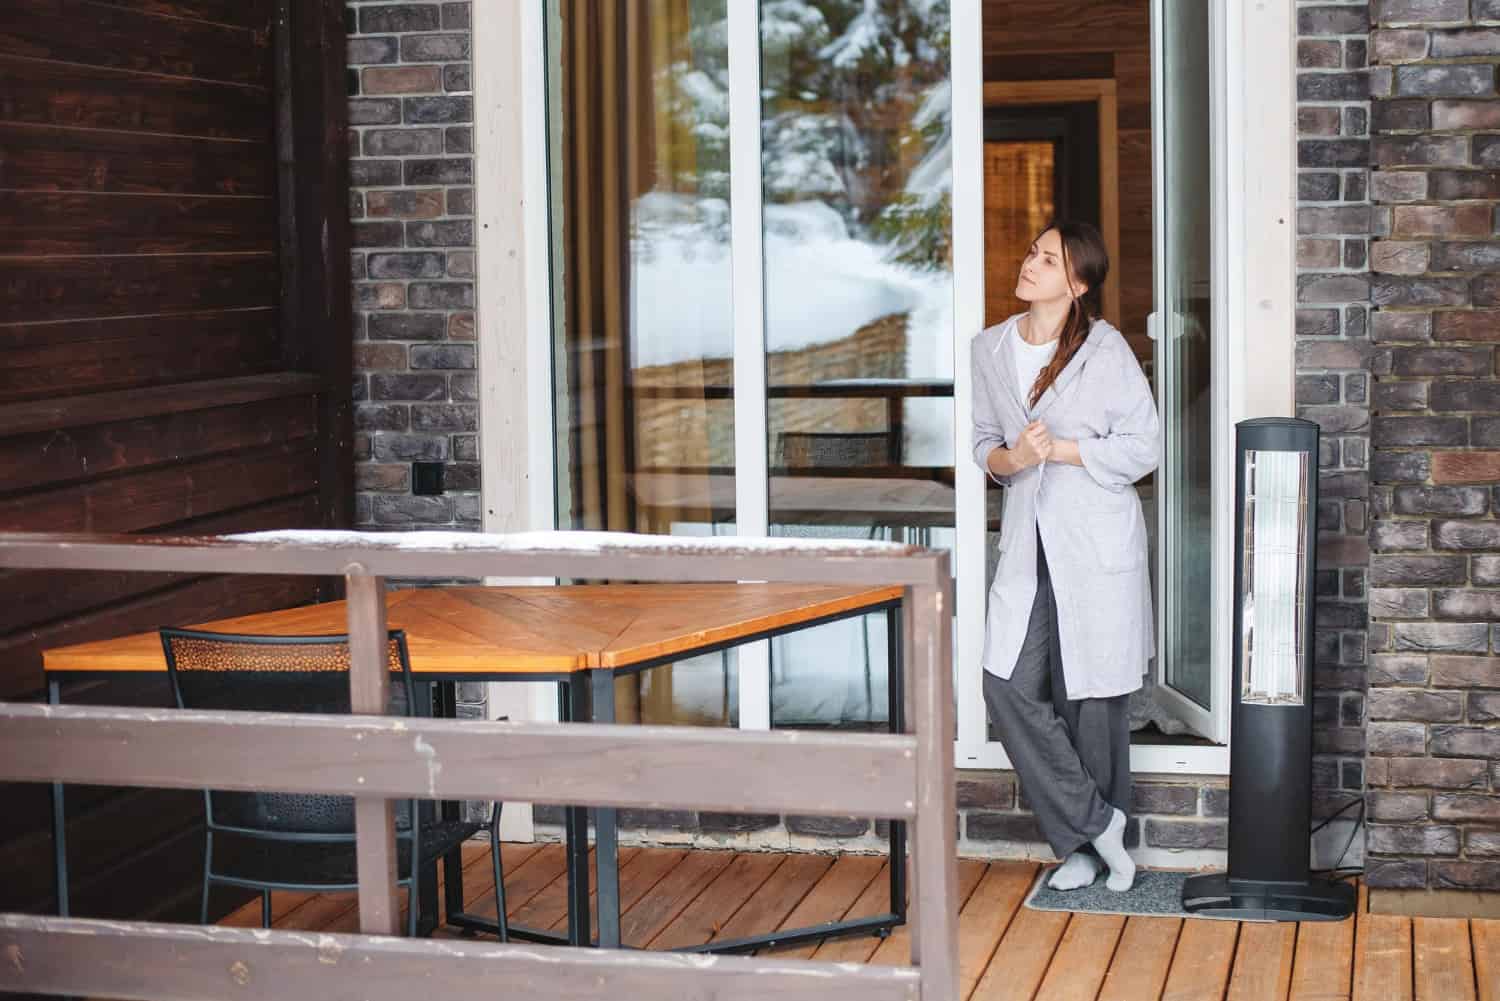 A woman wearing a light gray house robe and dark gray sweatpants stands just outside her patio door on a wooden deck on a cold winder morning. There's a wooden table and chairs, and a snow covered railing.